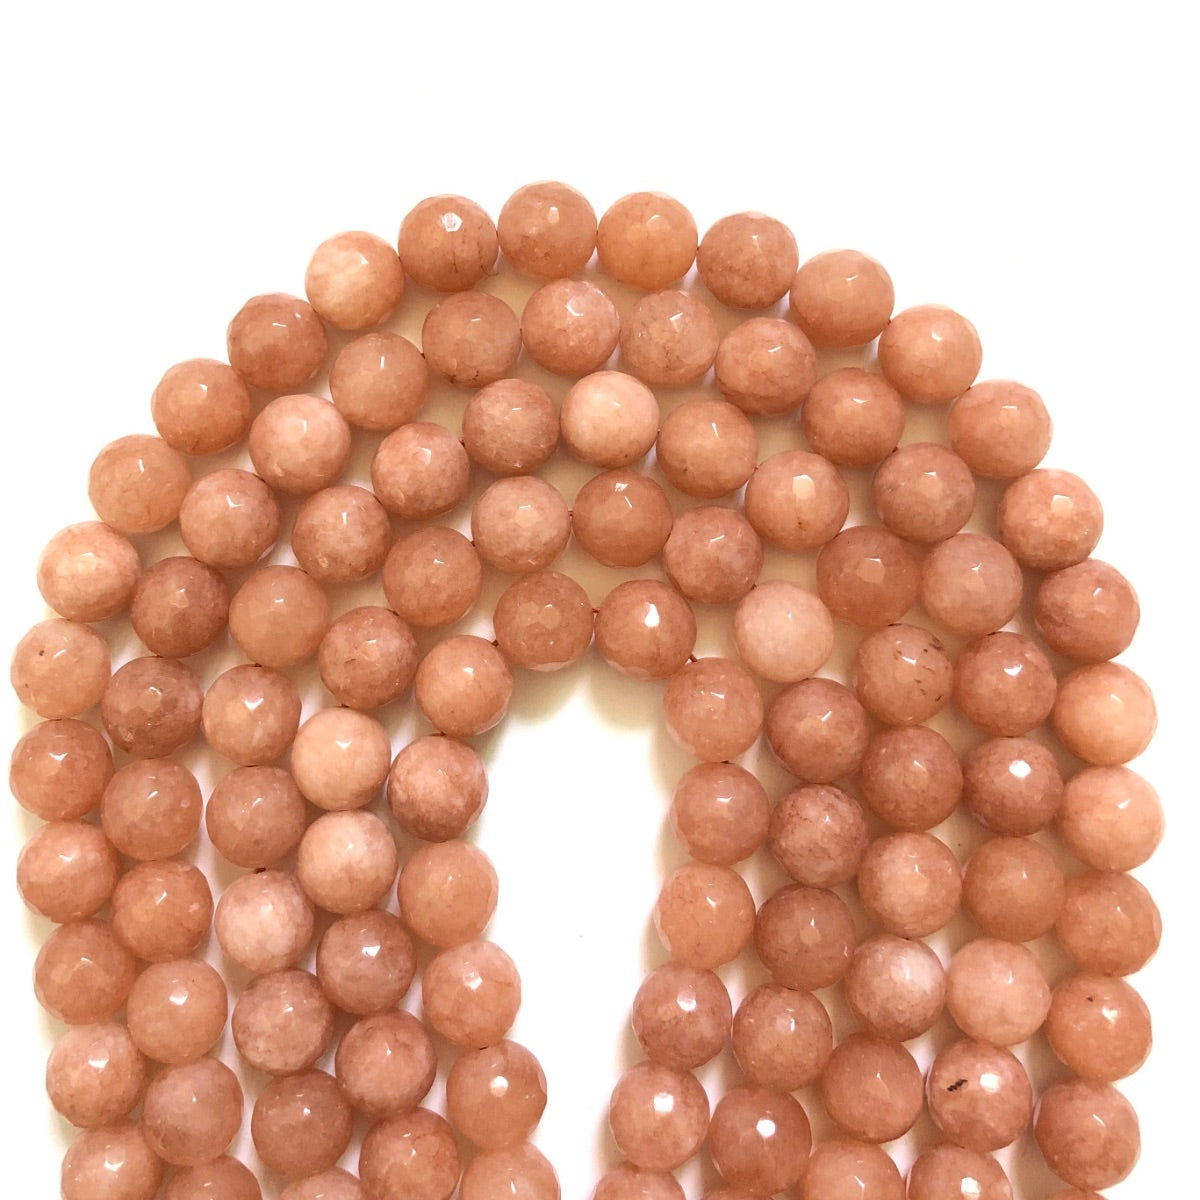 2 Strands/lot 12mm Peach Faceted Jade Stone Beads Stone Beads 12mm Stone Beads Faceted Jade Beads New Beads Arrivals Charms Beads Beyond